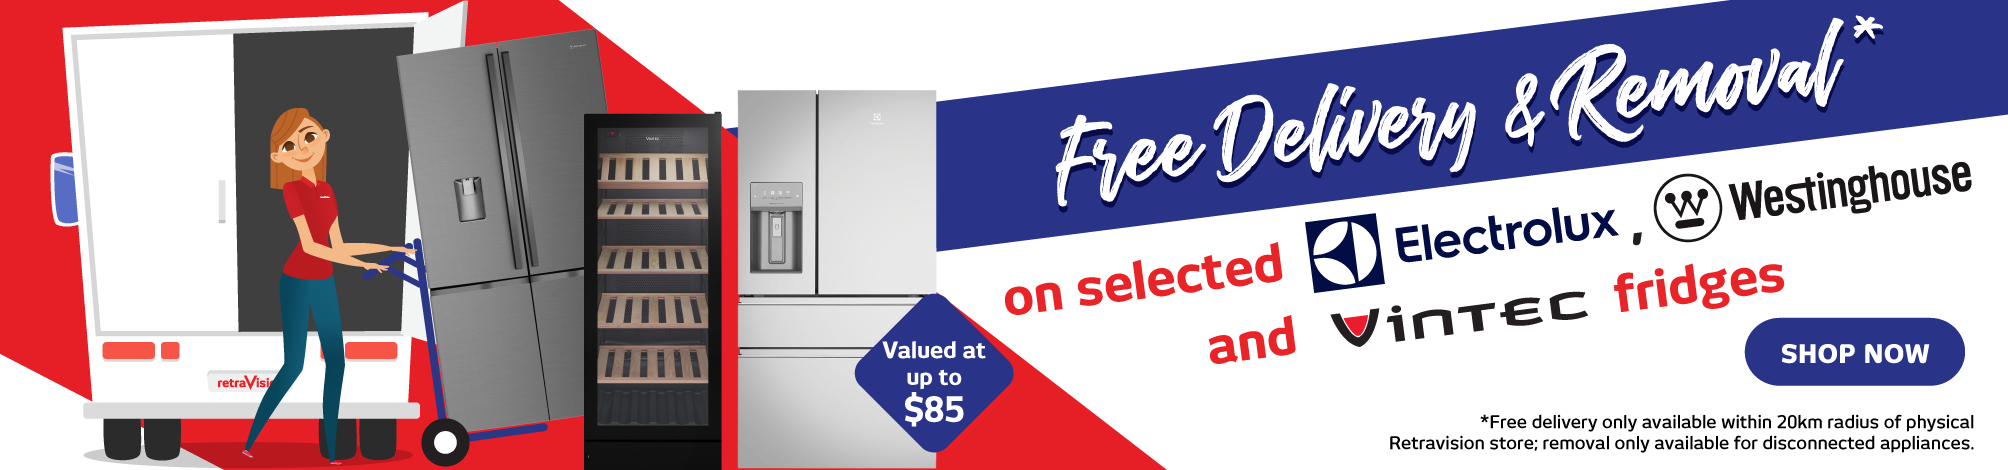 Free Delivery & Removal With Electrolux, Westinghouse & Vintec Fridges